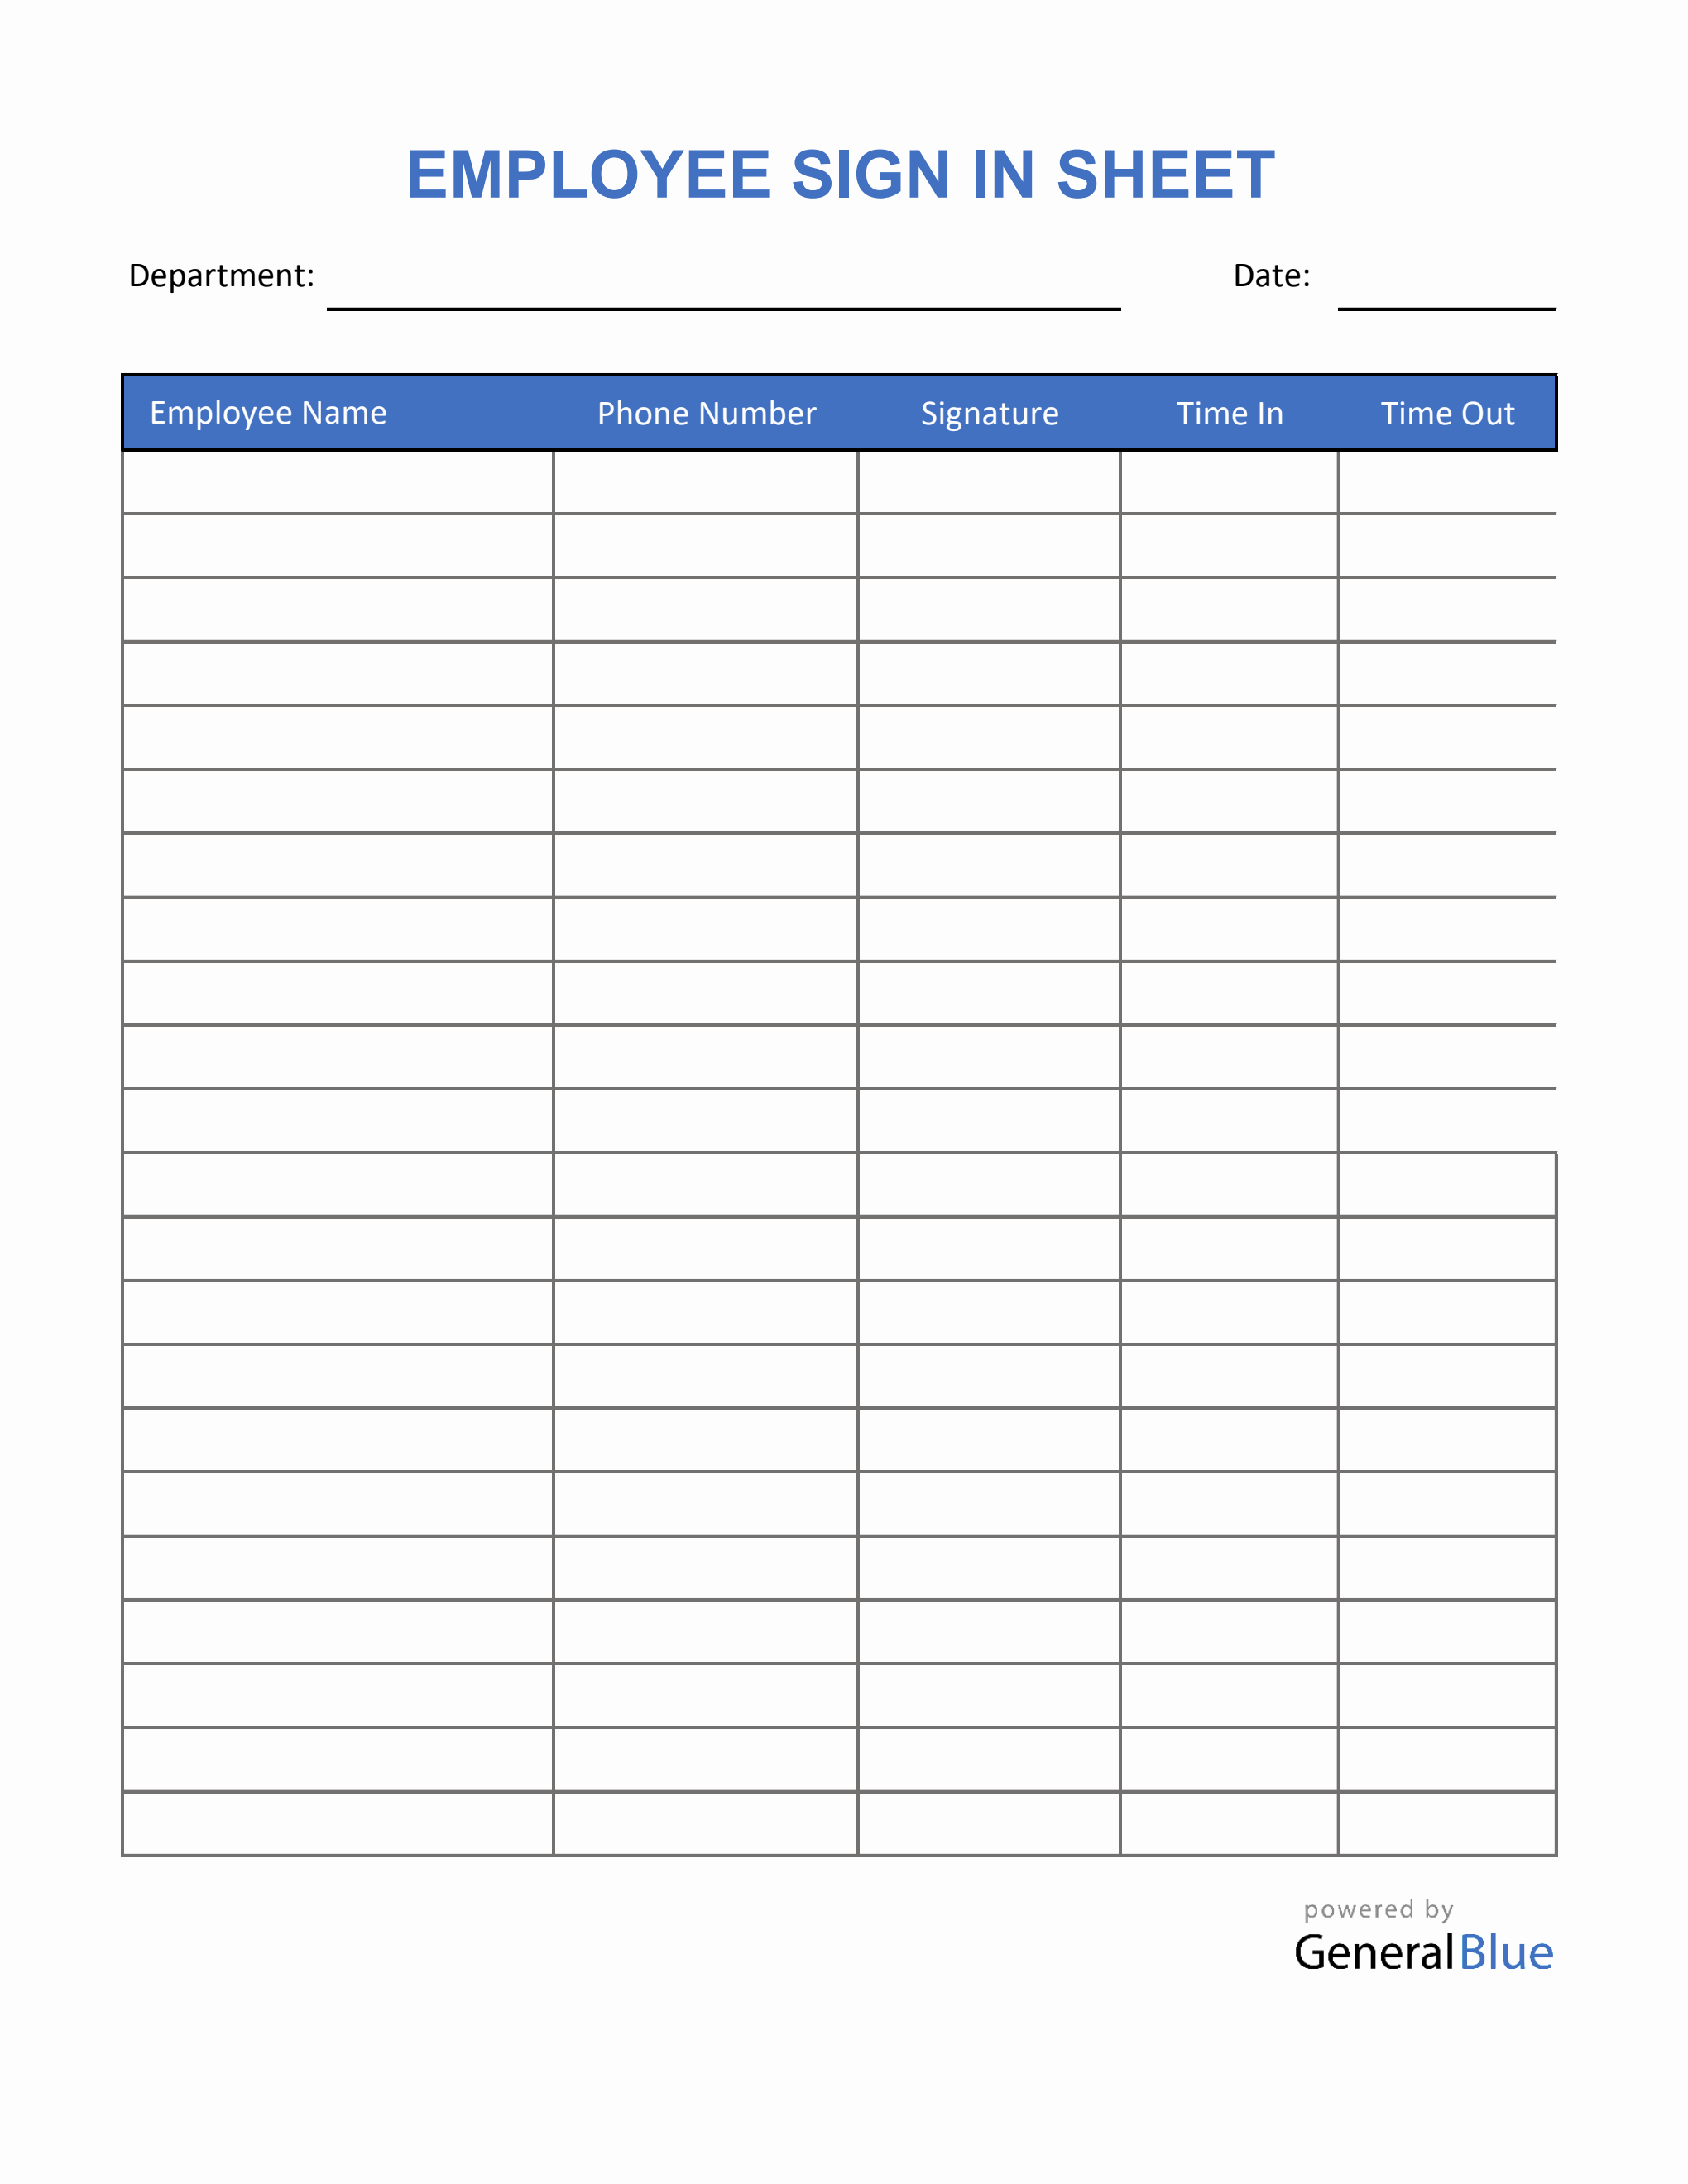 excel account template